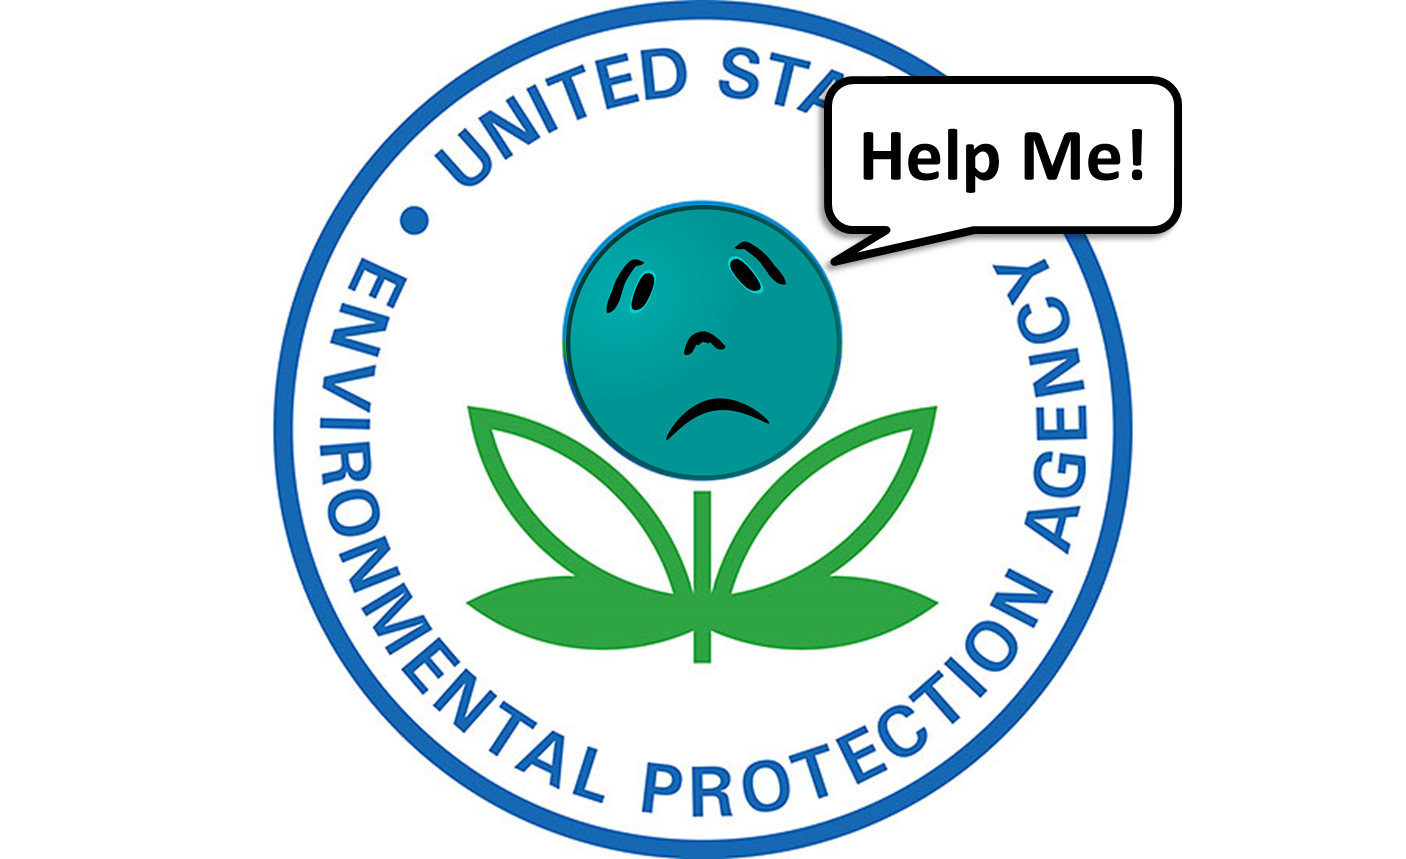 Want to comment on the proposed roll-back of EPA regulations?  Here’s how!